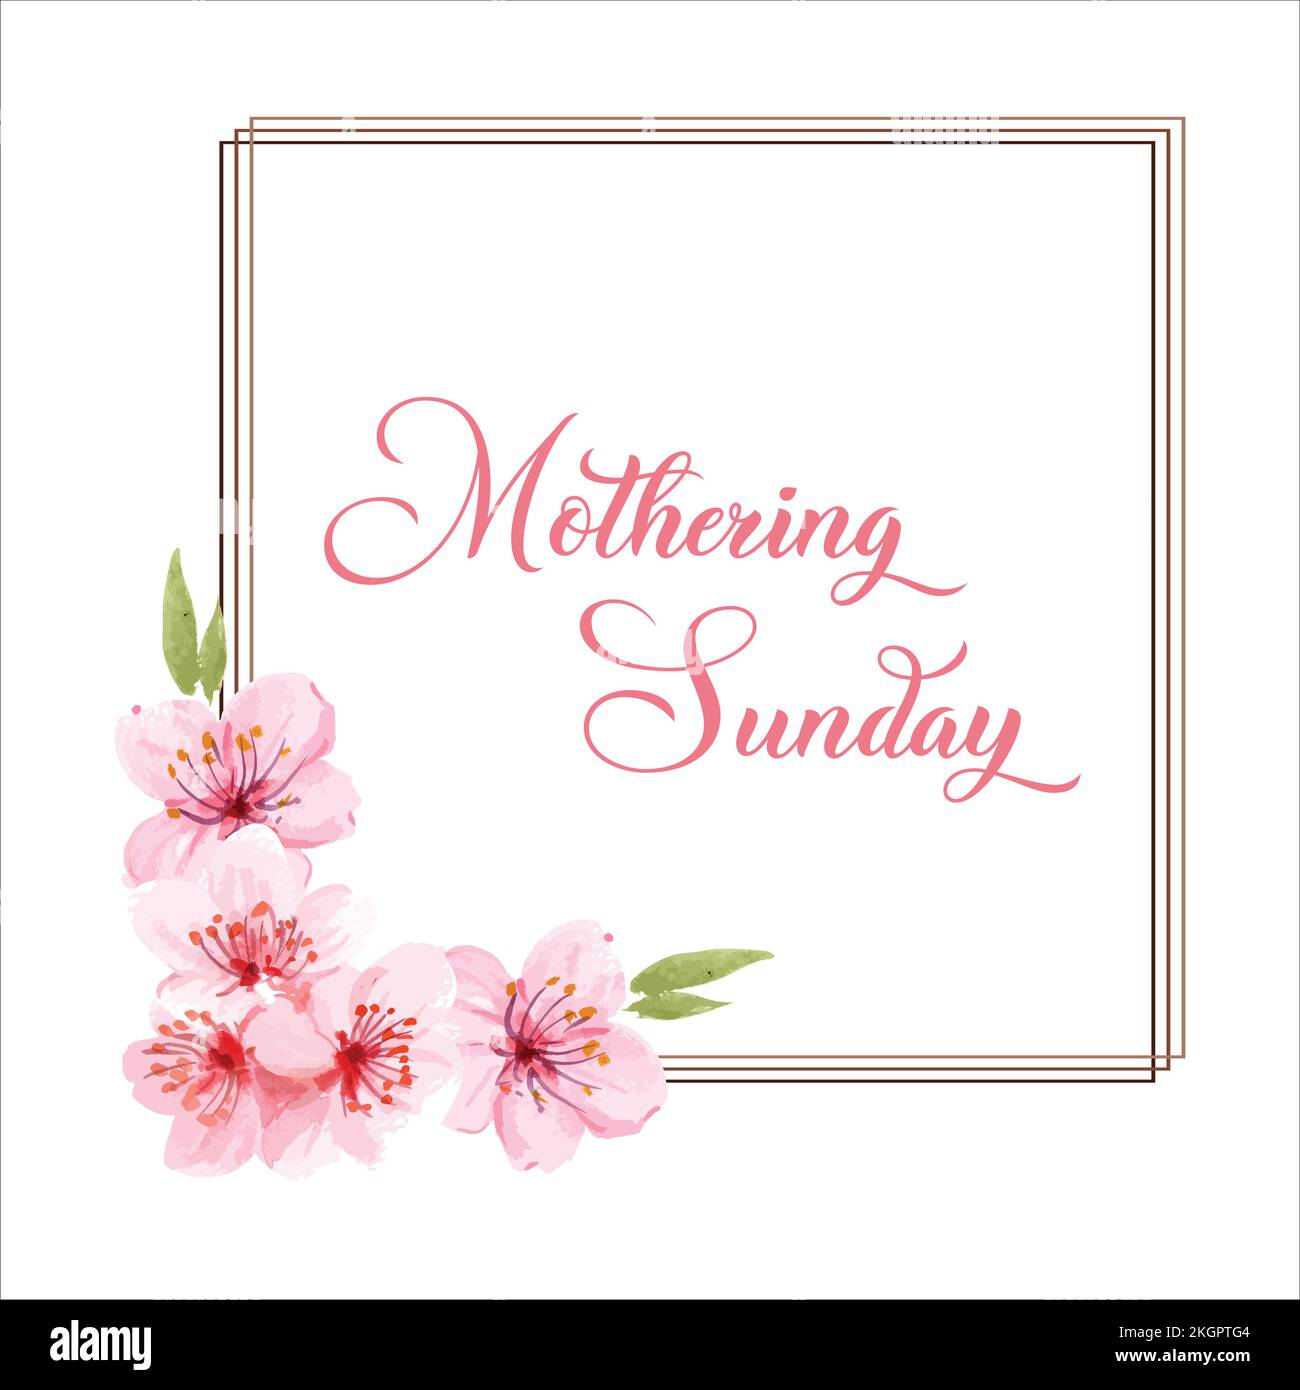 Mothering Sunday banner with cherry blossoms. Pink flowers over blue painted stripes on white. Mothering Sunday greeting card template, rectangular fr Stock Vector